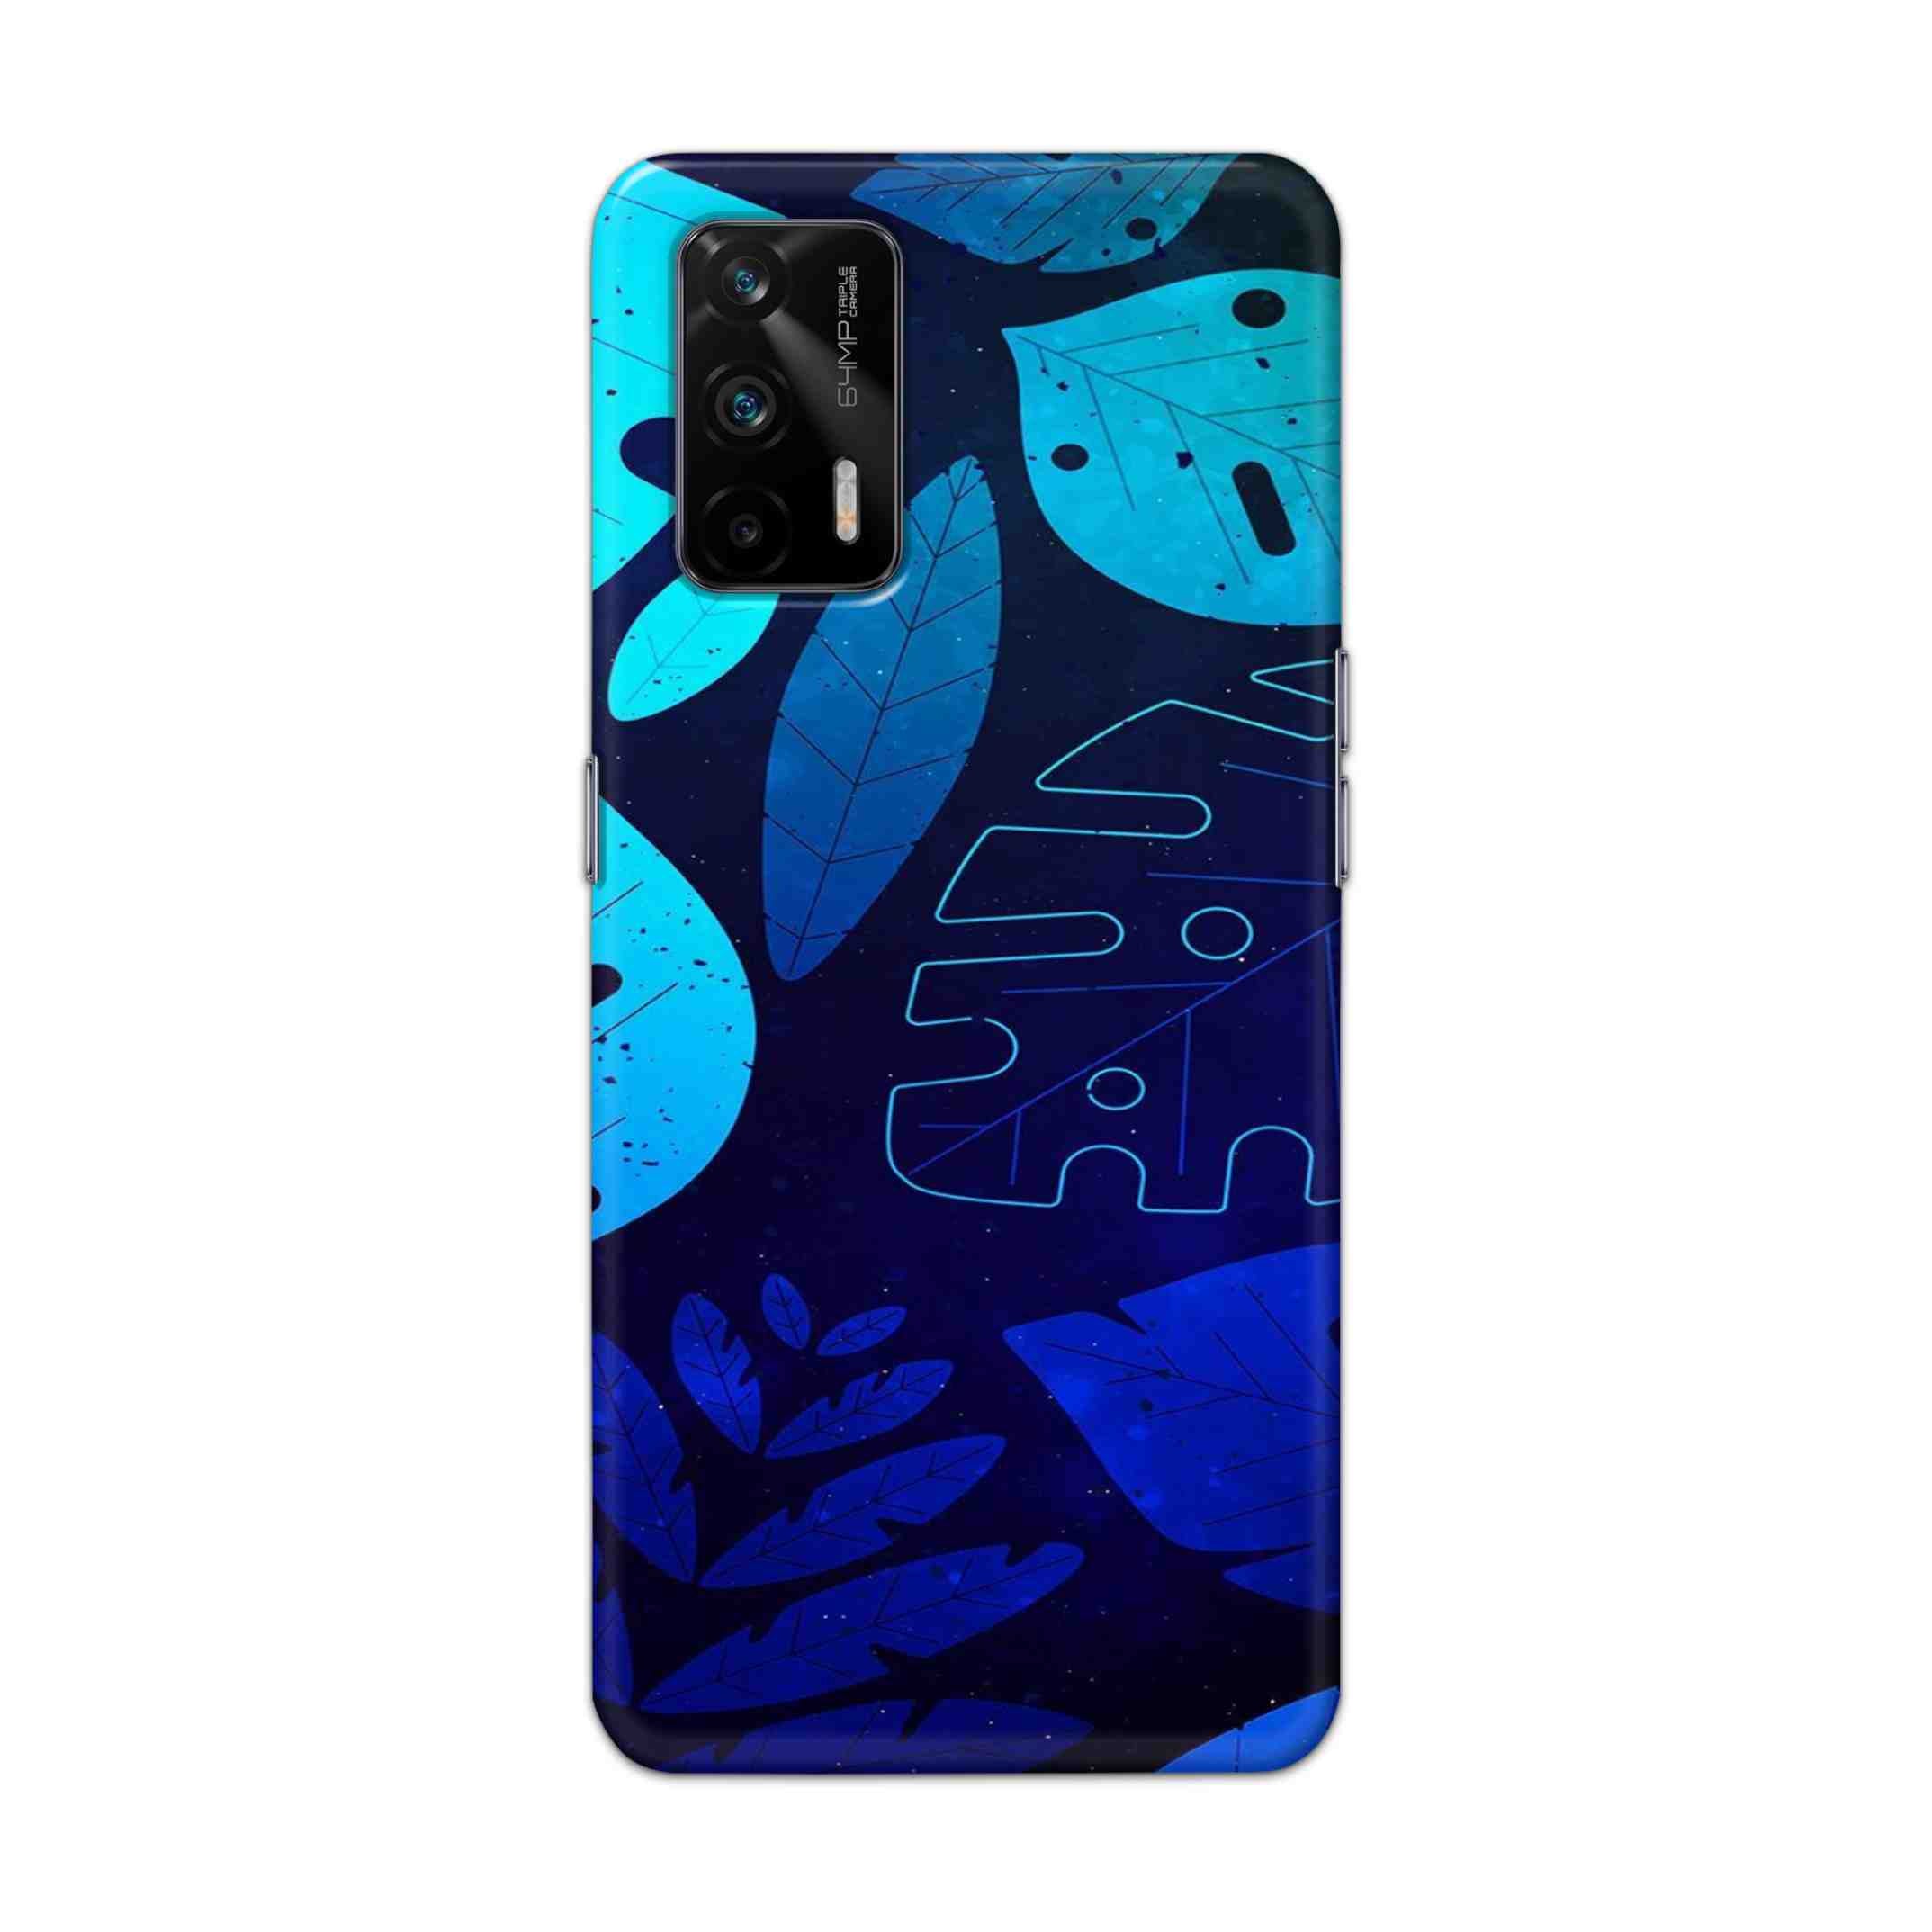 Buy Neon Leaf Hard Back Mobile Phone Case Cover For Realme X7 Max Online